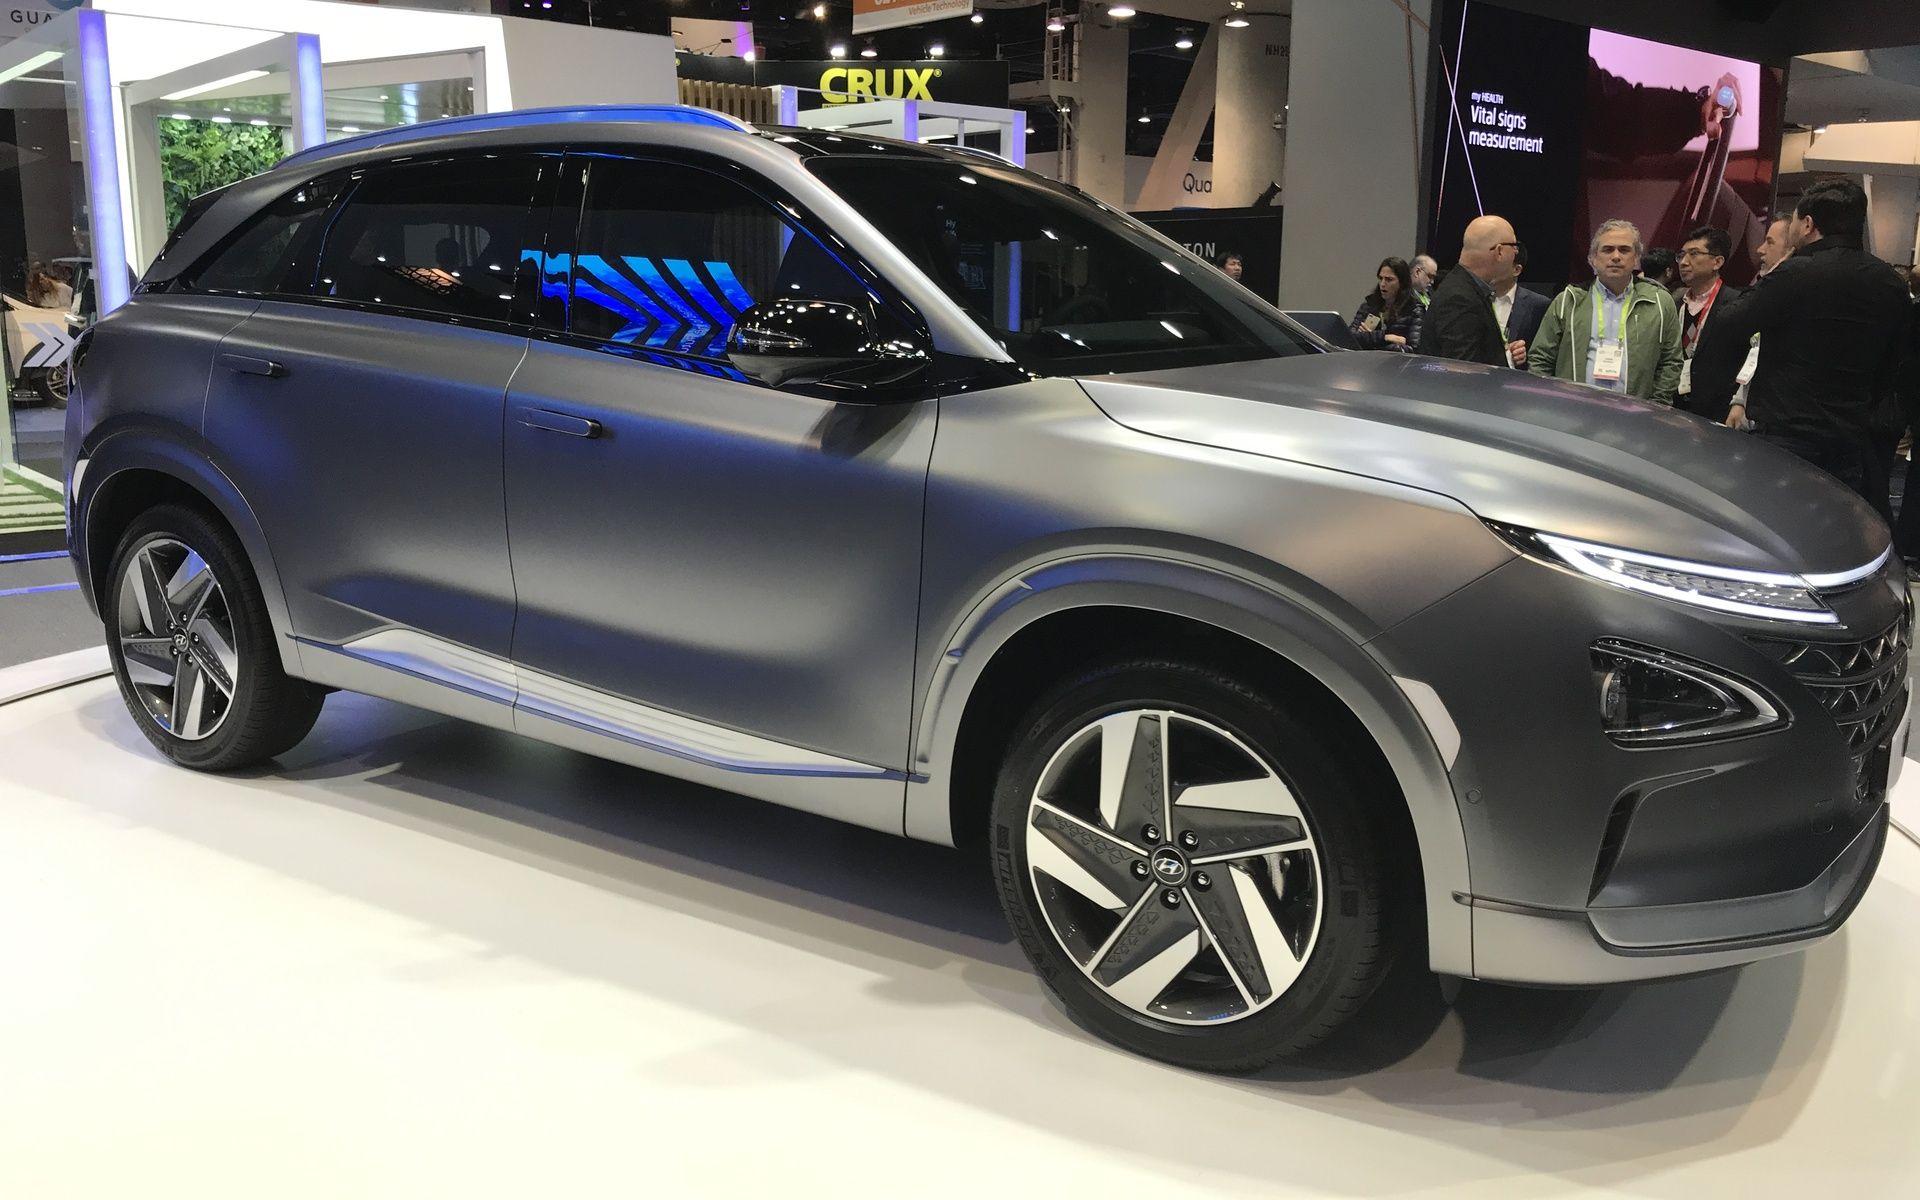 Hyundai at CES 2018: Hydrogen and Artificial Intelligence for